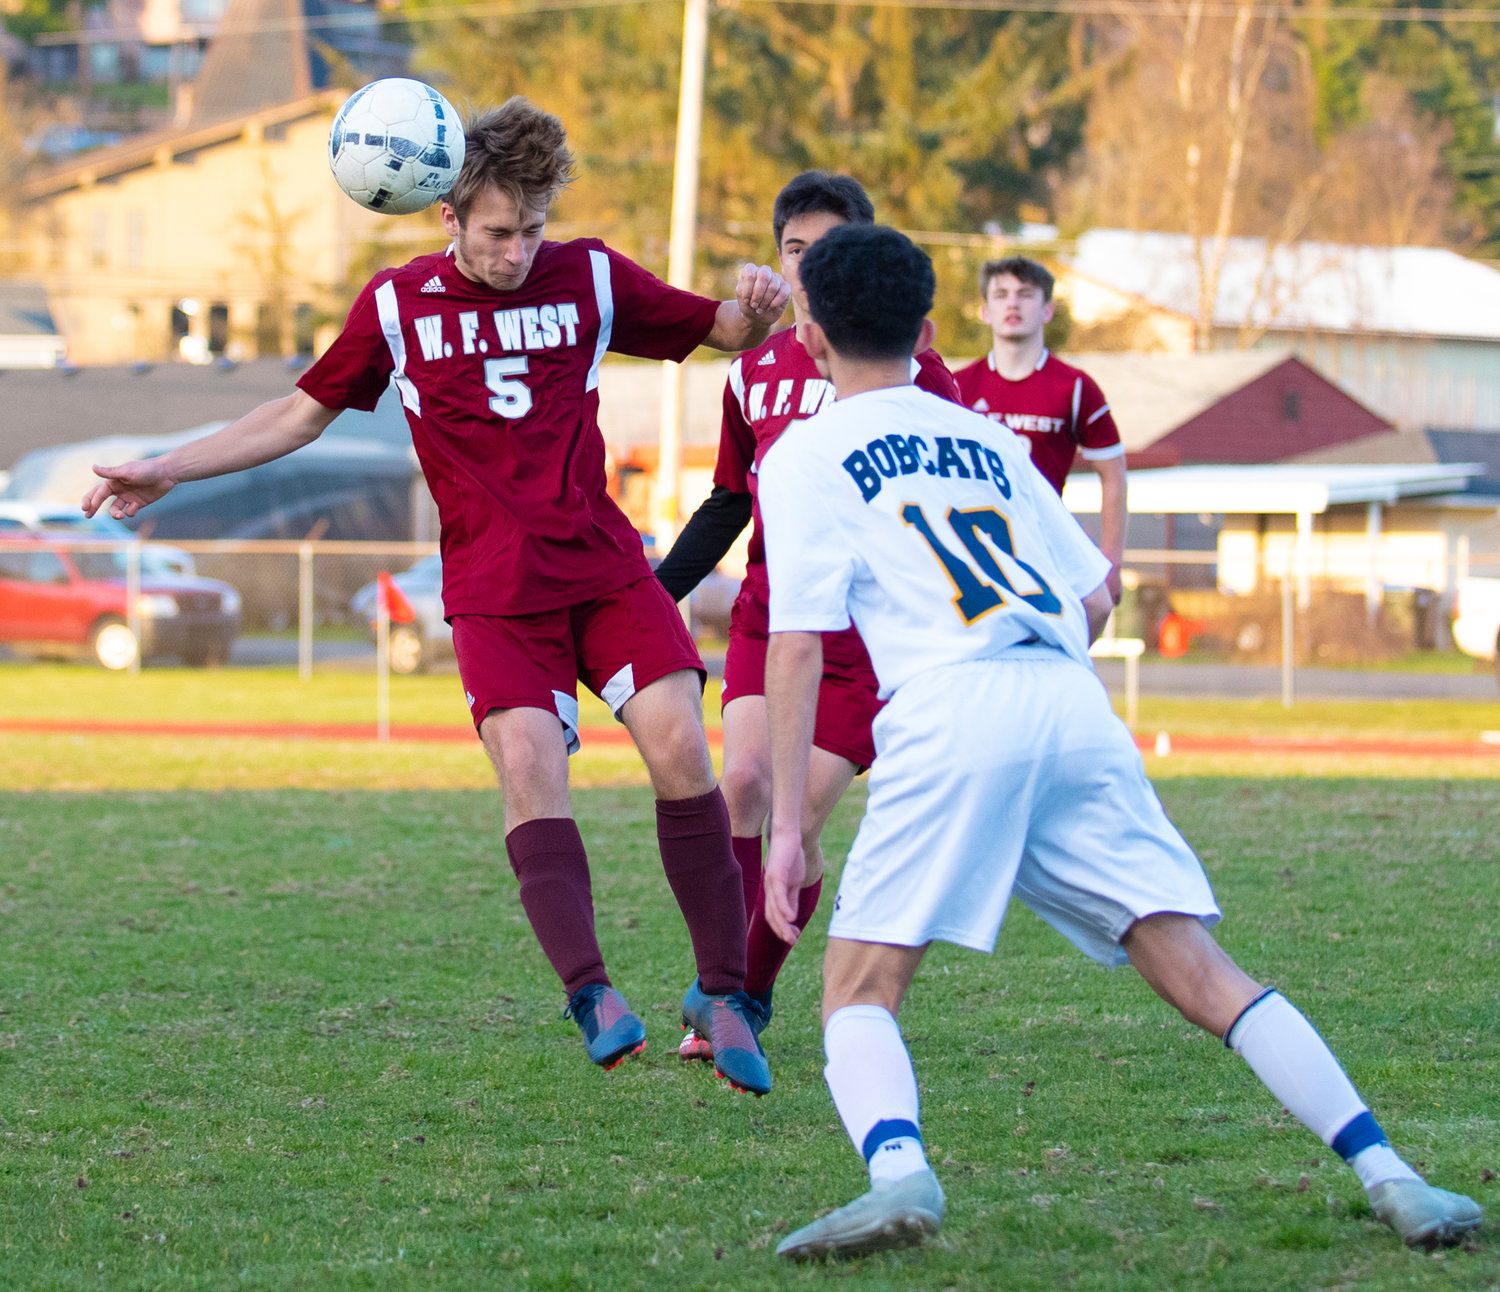 W.F. West's Jacob Moeckel (5) gets a header against Aberdeen on Tuesday.